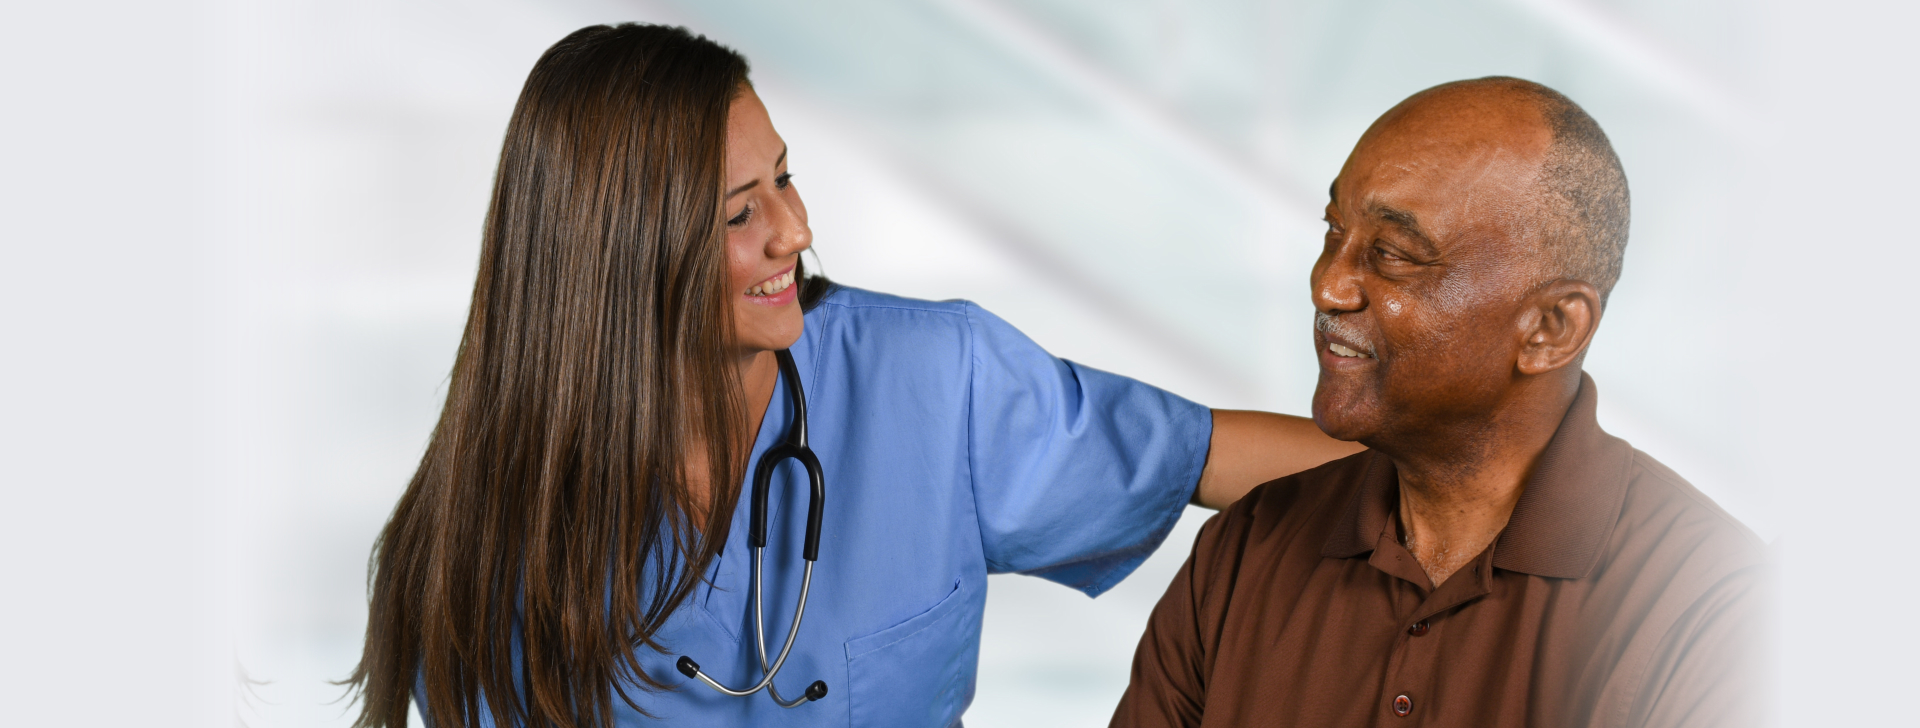 Home Health Care in TX | Friendly Healthcare Services